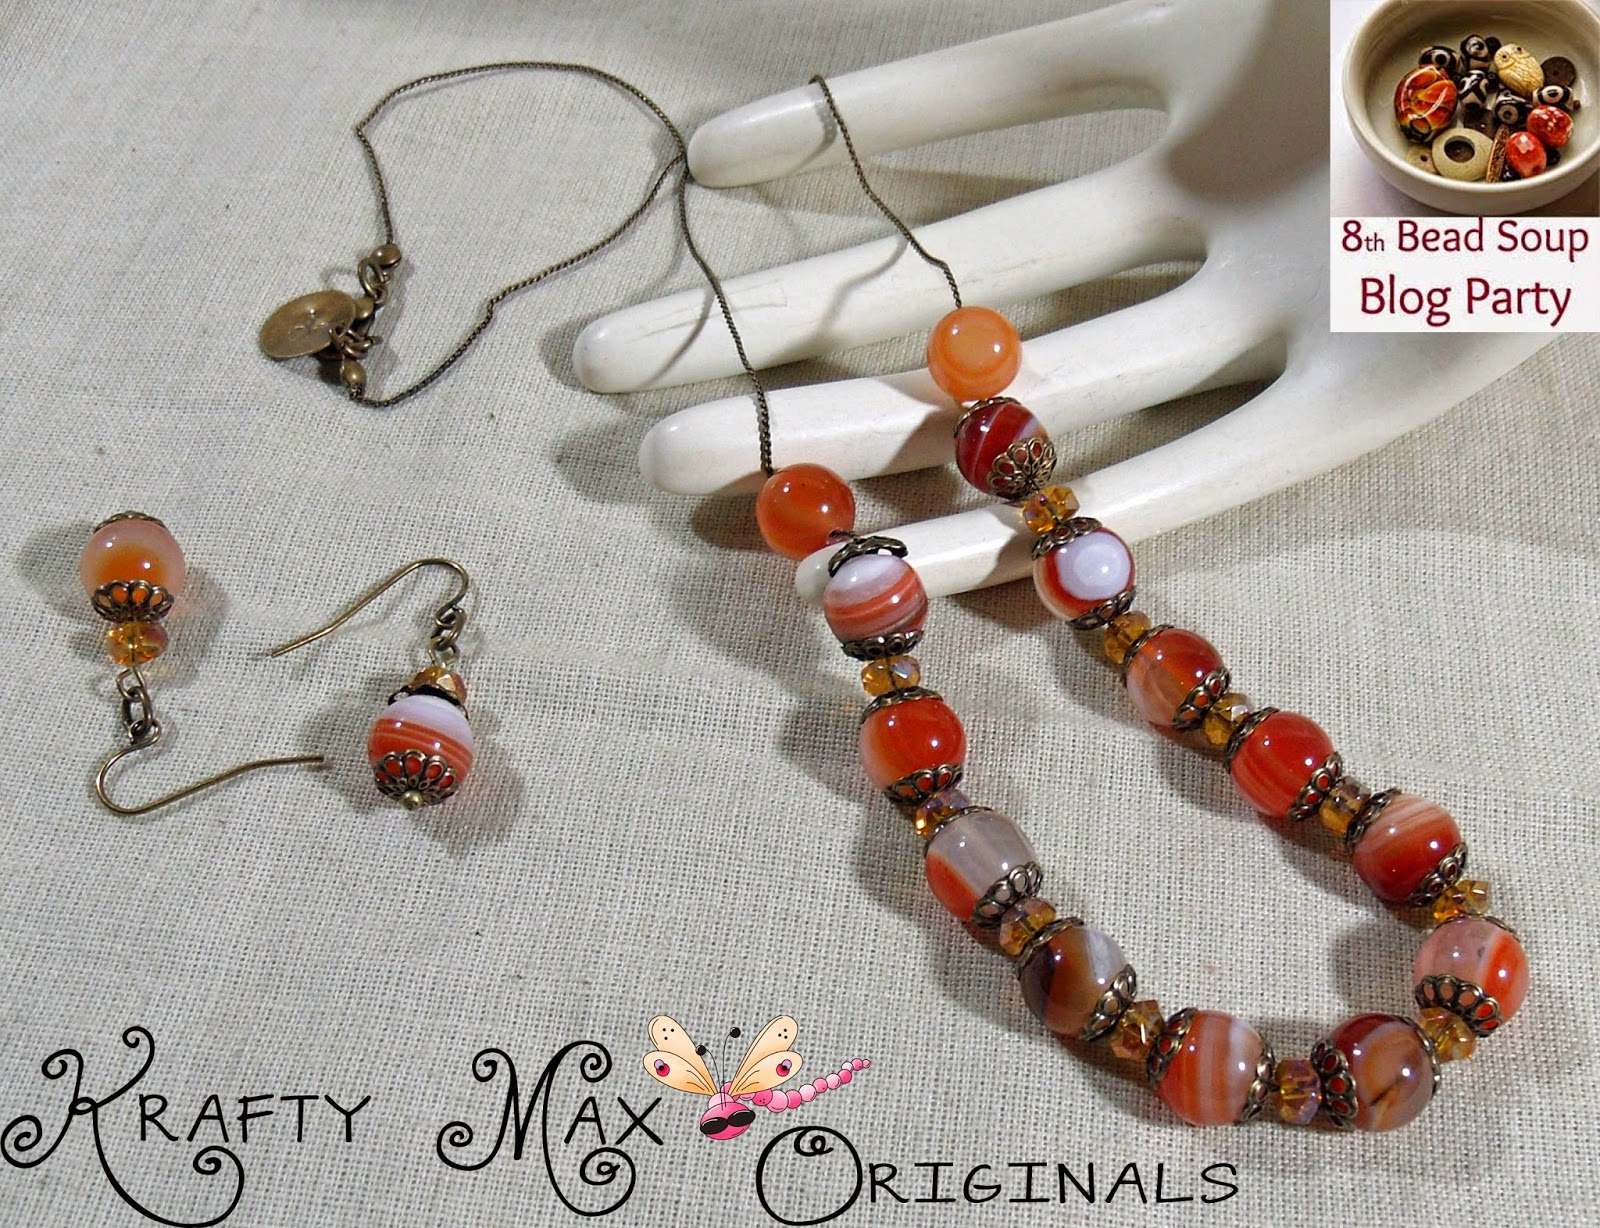 http://www.artfire.com/ext/shop/product_view/KraftyMax/9283209/8th_bead_soup_blog_party_-_glowing_red_agate_neclace_and_earrings/handmade/jewelry/sets/gemstone